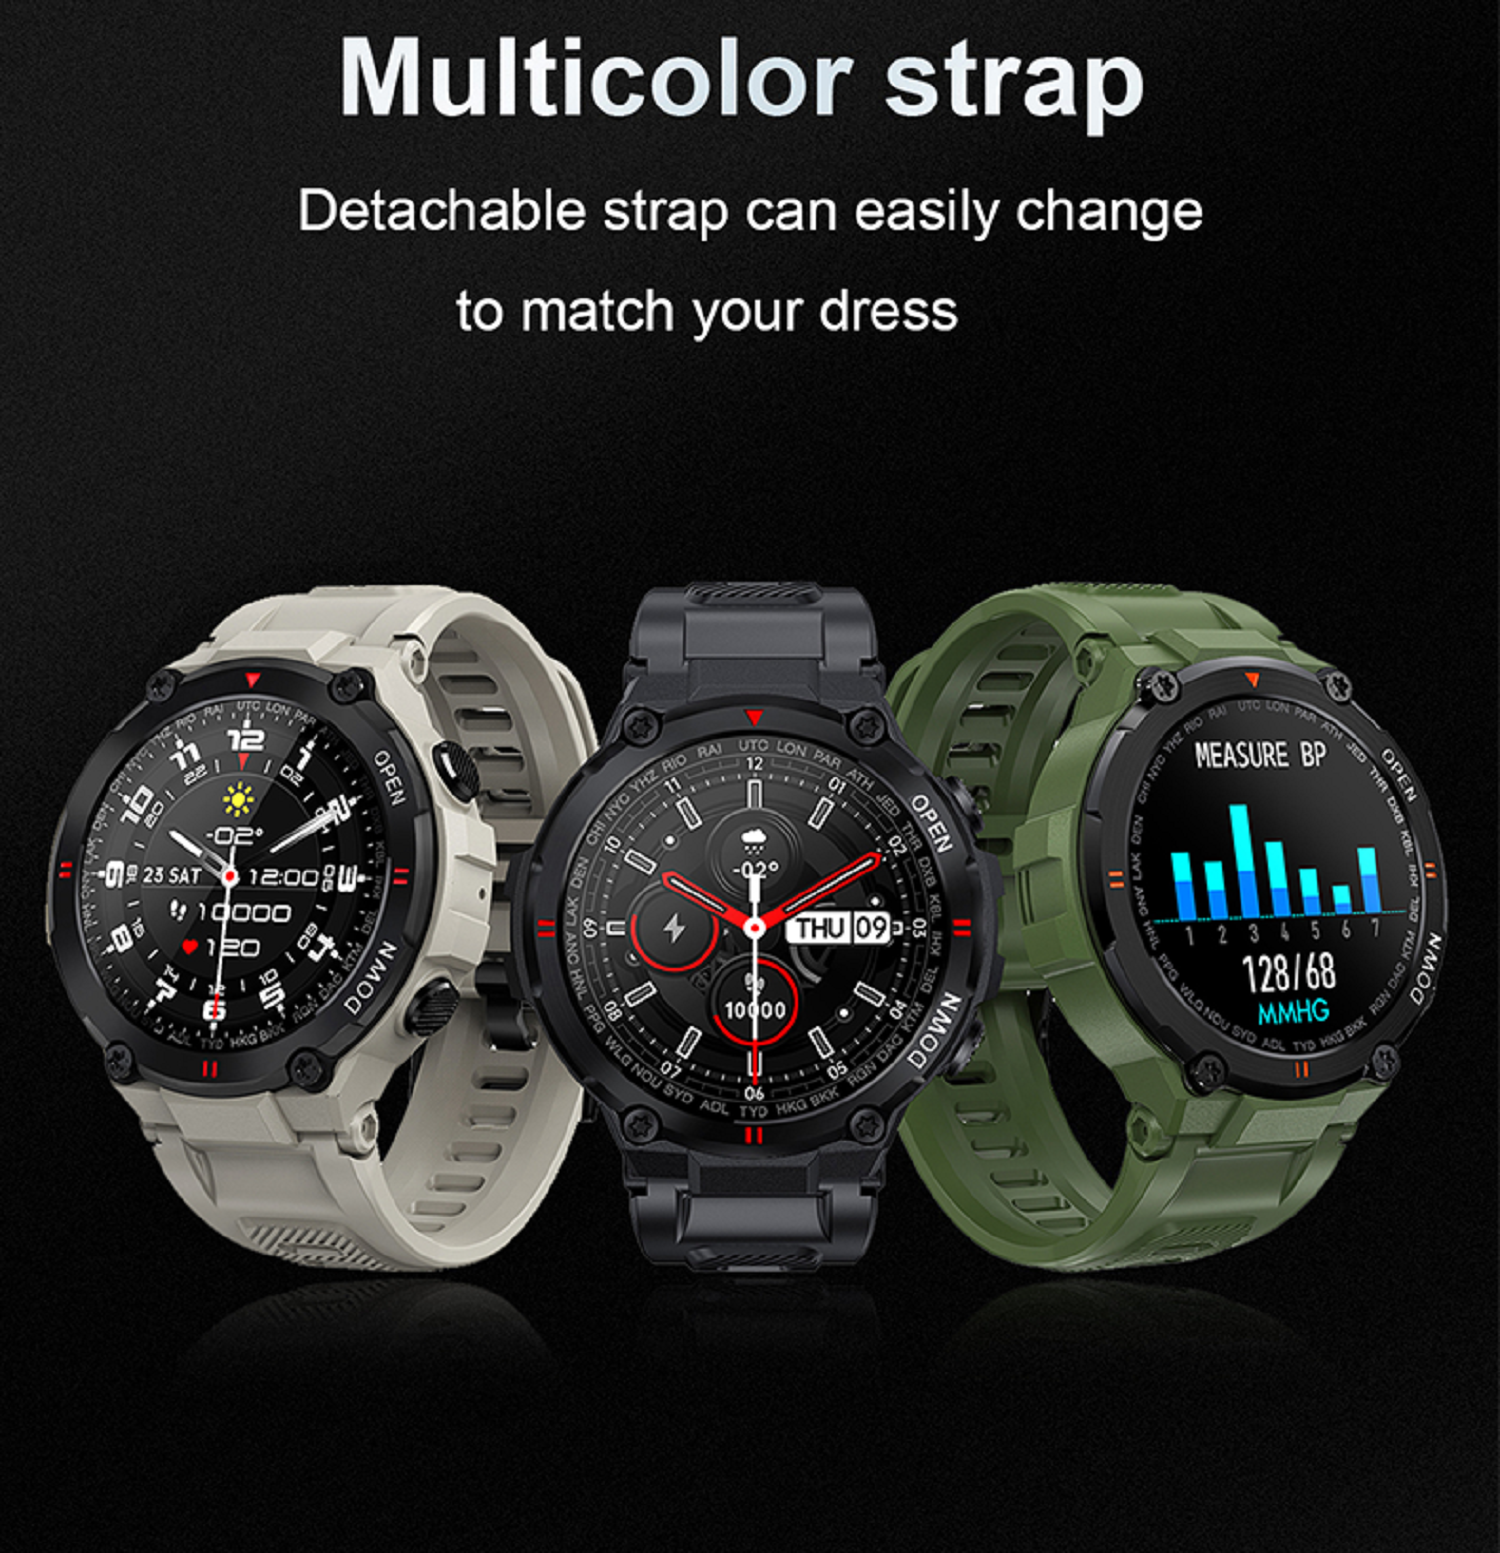 Robuste K22 Smartwatch with detachable strap to match your outfit. | Blue Chilli Electronics.